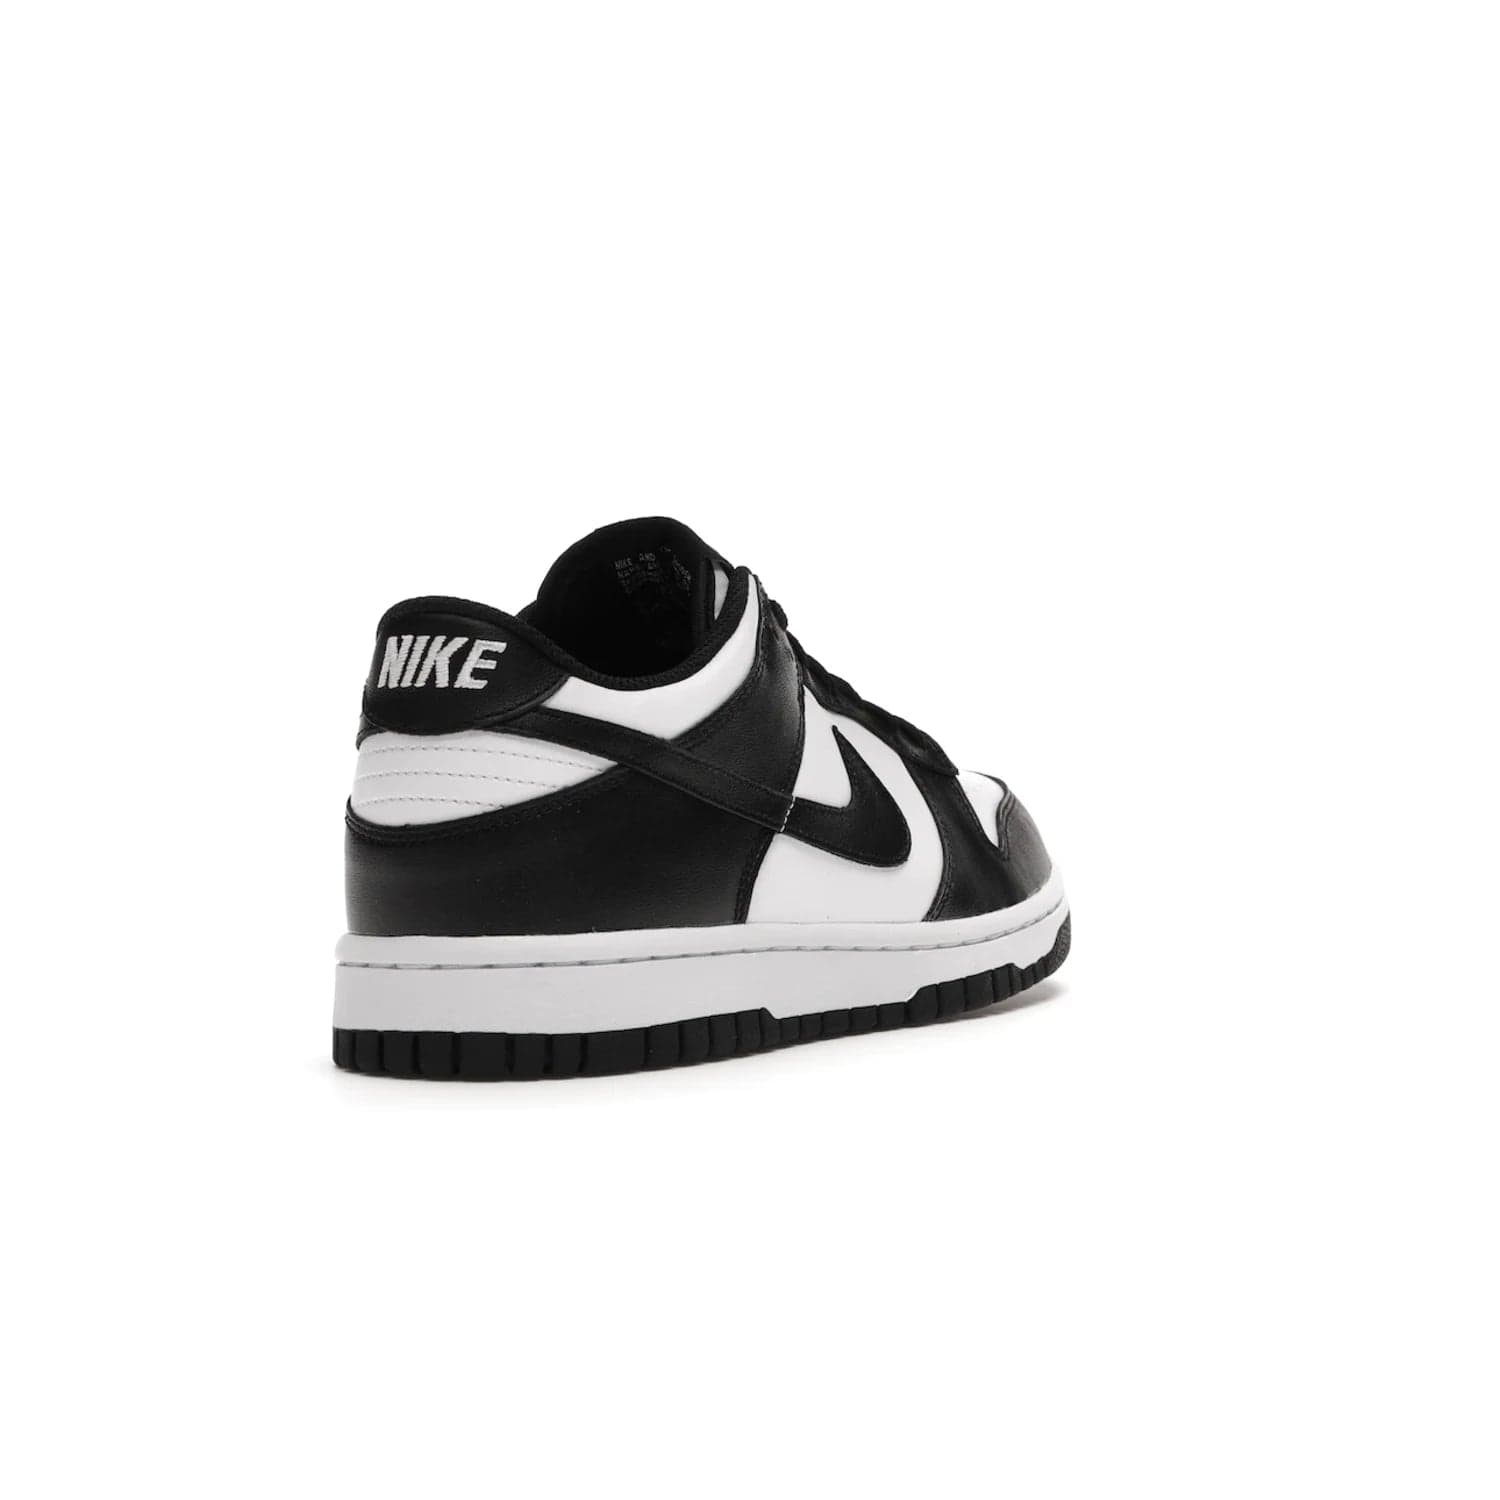 Nike Dunk Low Retro White Black Panda (2021) (GS) - Image 31 - Only at www.BallersClubKickz.com - Upgrade your style with the Nike Dunk Low Retro White Black (GS). Featuring premium leather, iconic Nike text, signature Swoosh logo and striking black/white colorway, this striking silhouette is the perfect mix of style and comfort. Colorway released in March 2021.